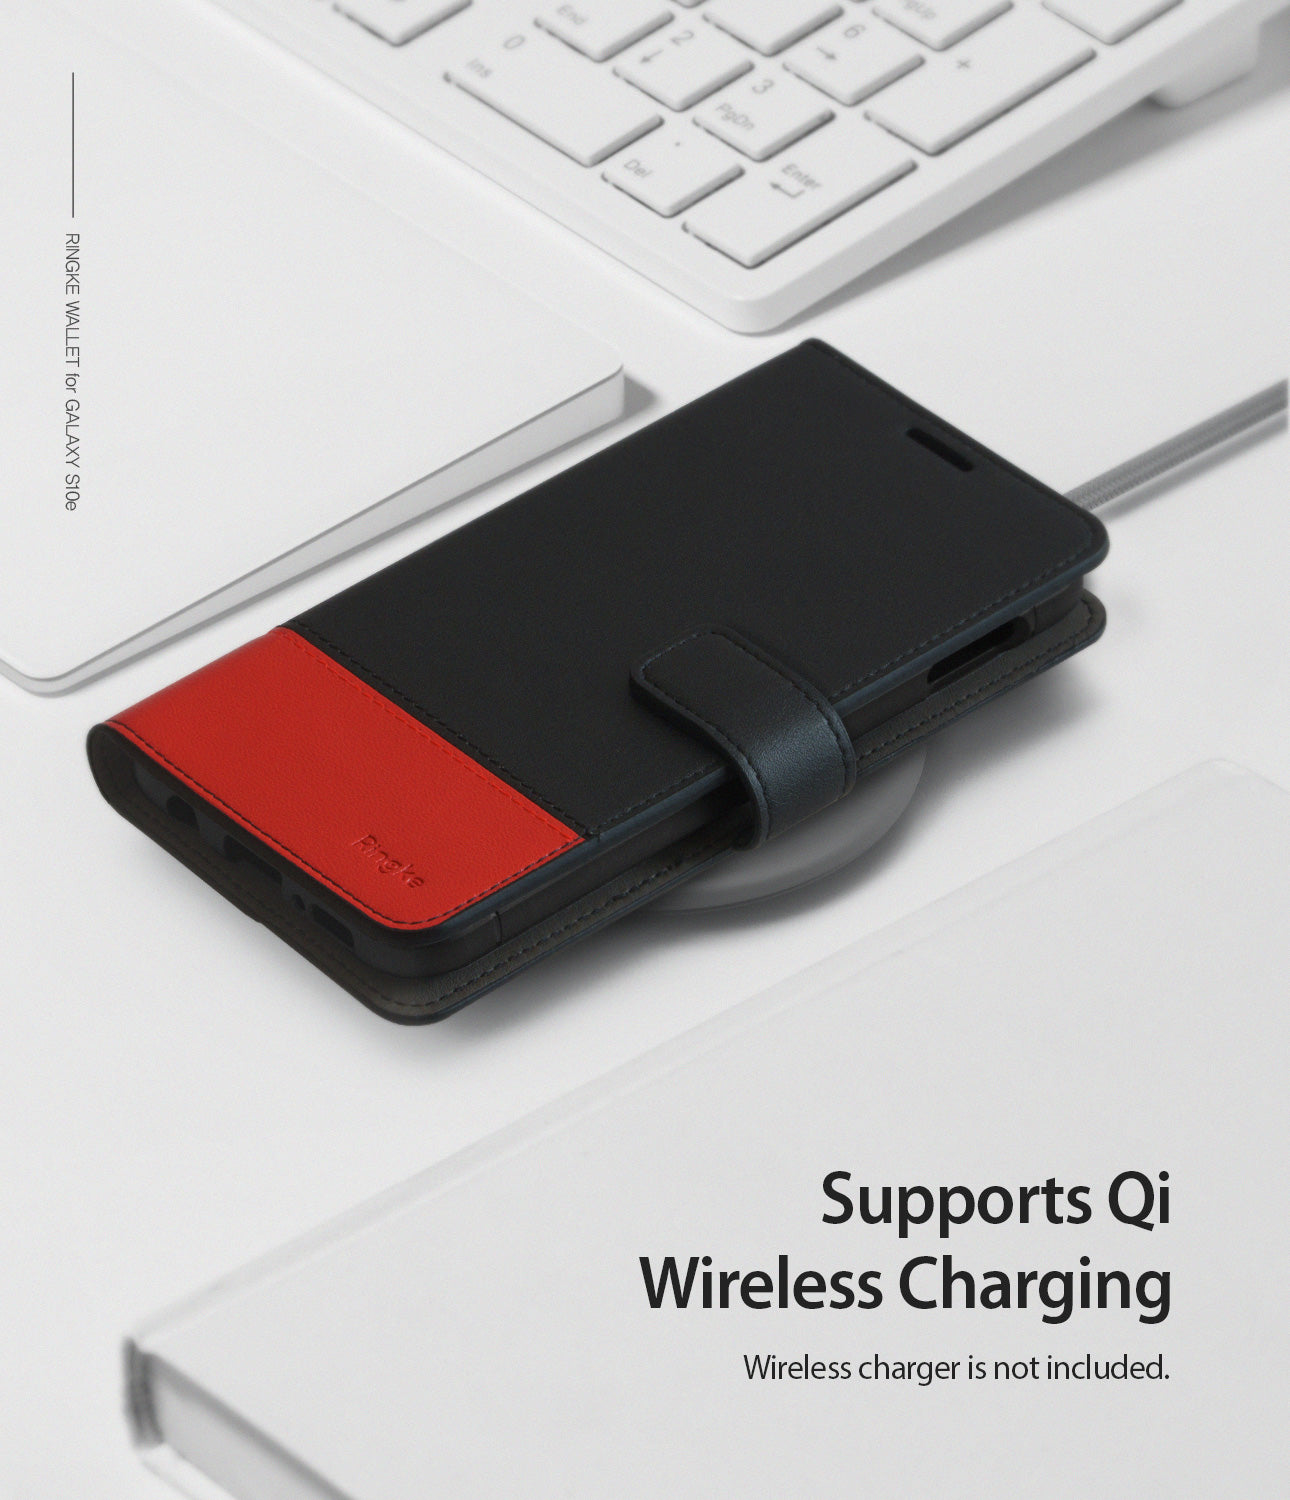 wireless charging compatible without removing the case